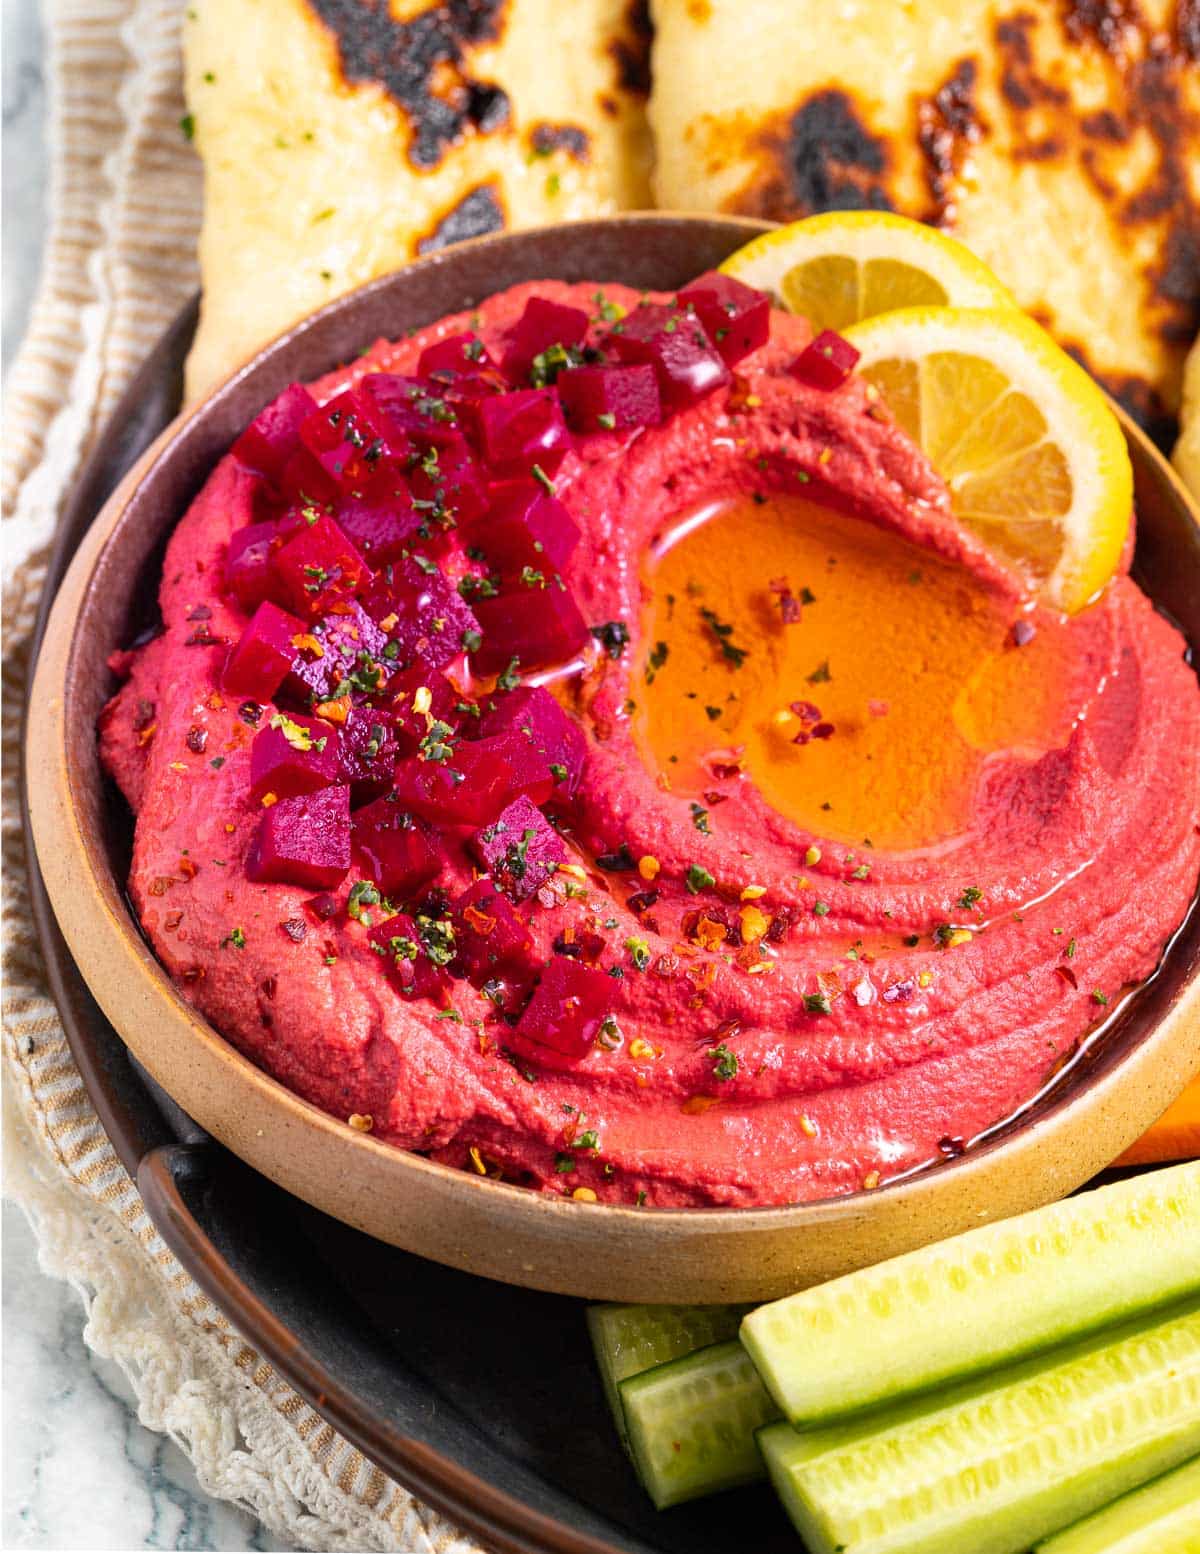 beet hummus in abowl topped with cubed beets & olive oil